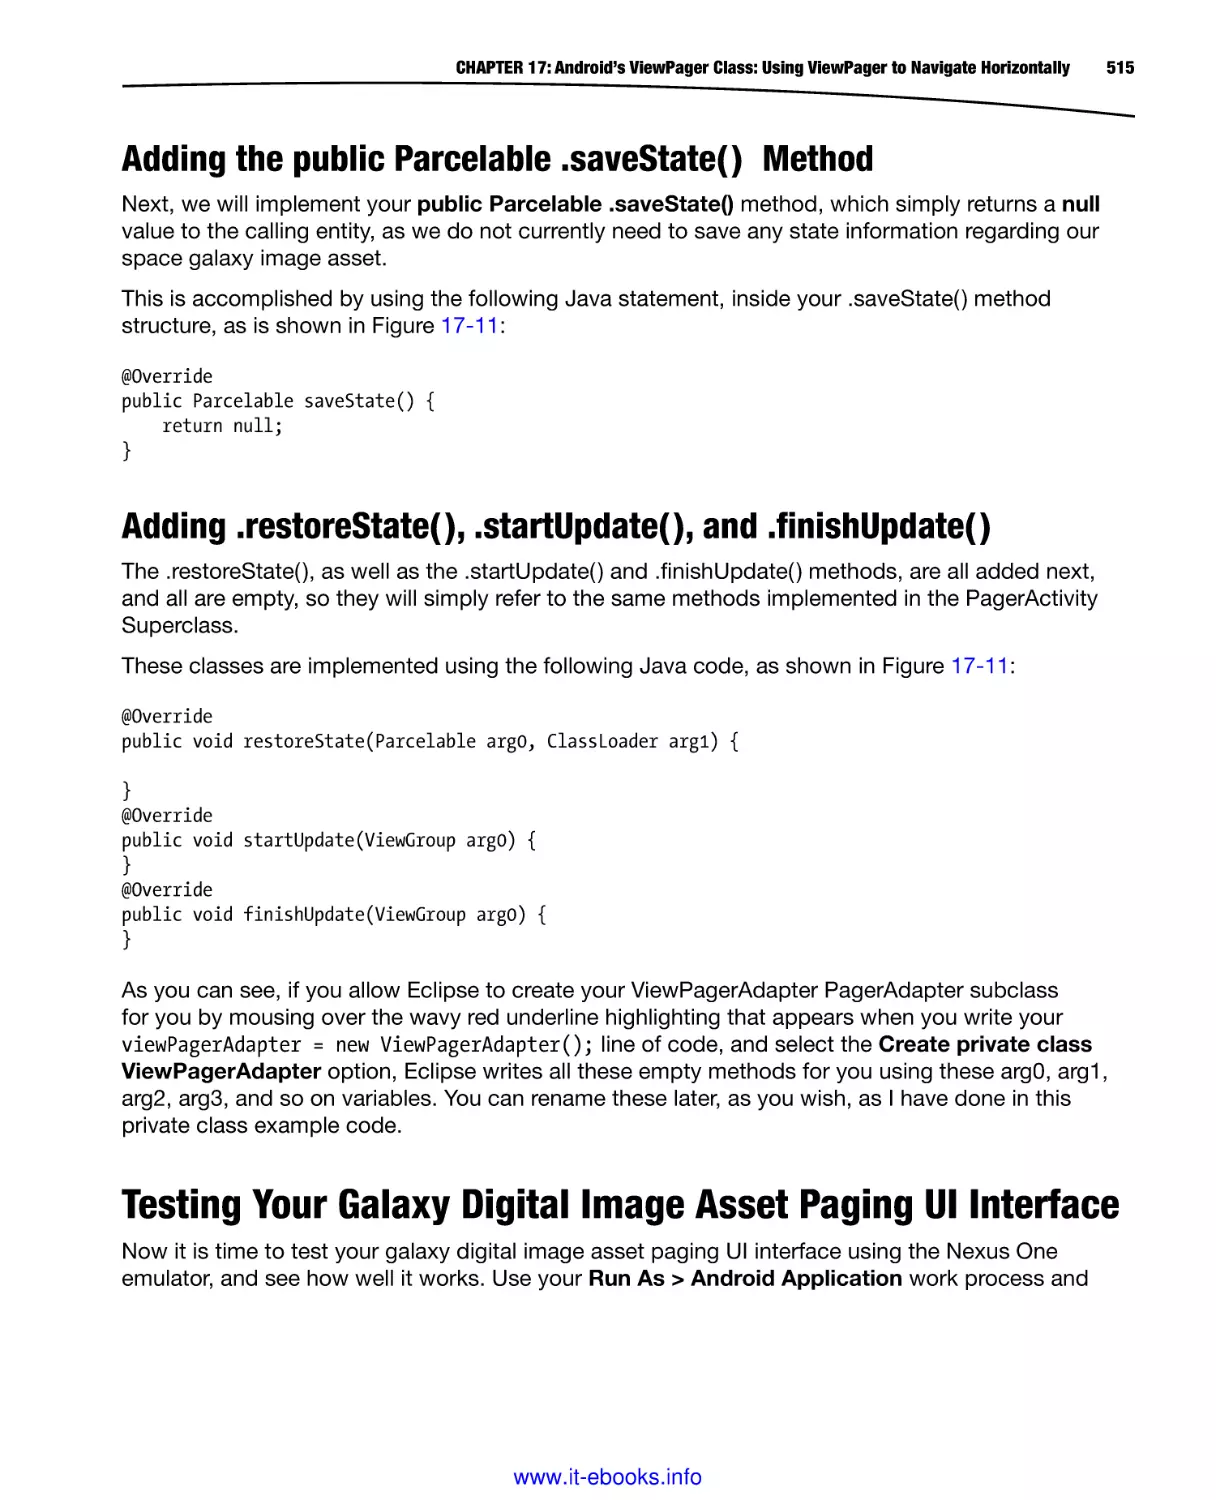 Adding the public Parcelable .saveState( ) Method
Adding .restoreState( ), .startUpdate( ), and .finishUpdate( )
Testing Your Galaxy Digital Image Asset Paging UI Interface